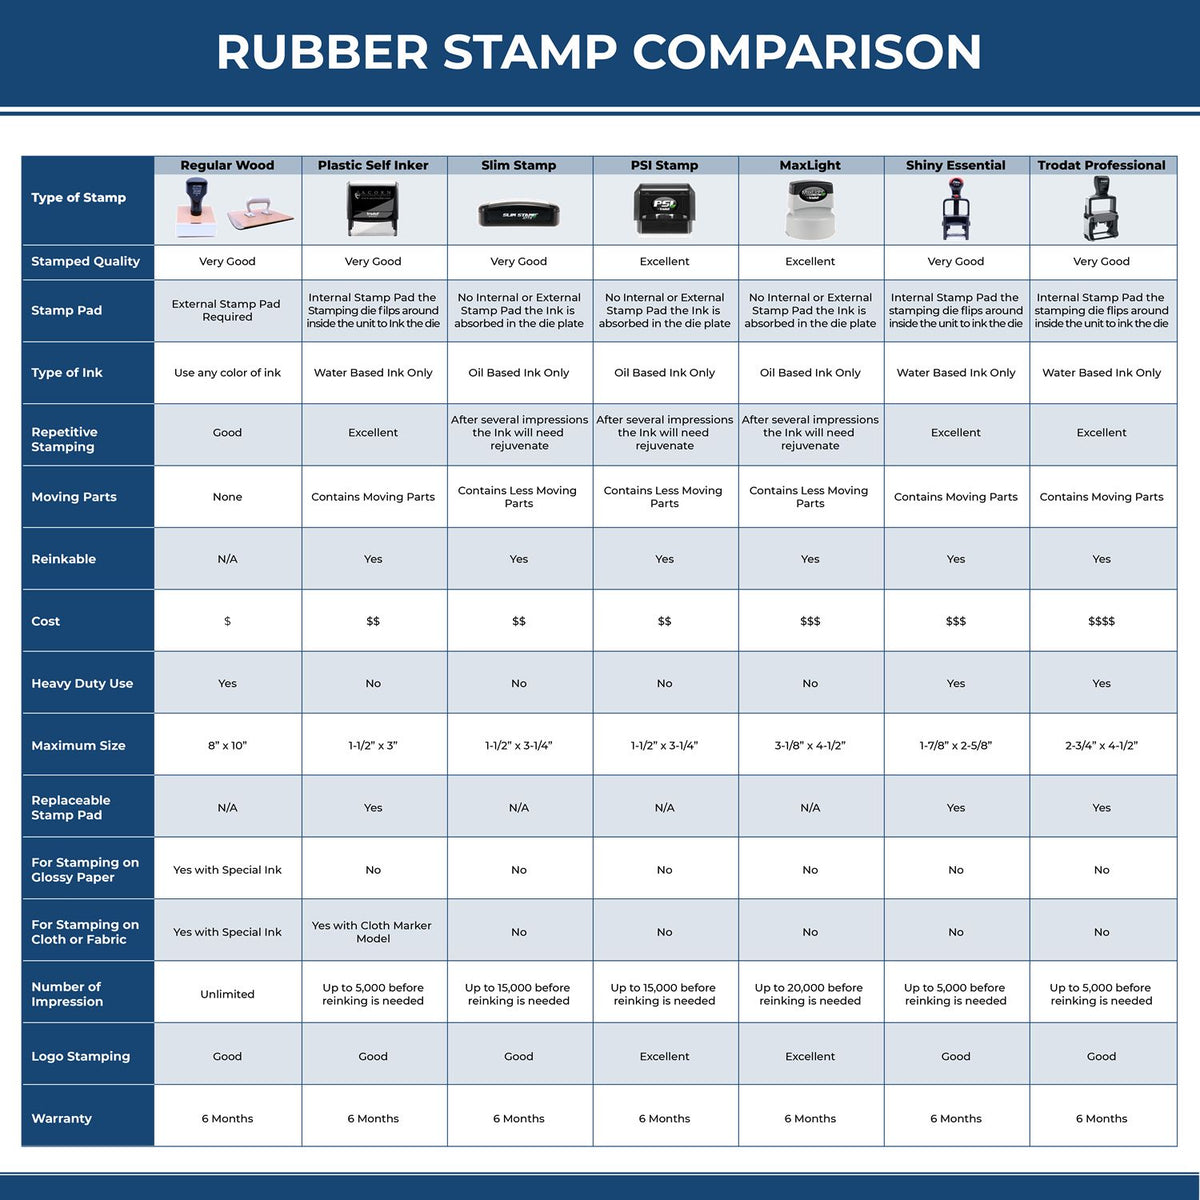 A comparison chart for the different types of mount models available for the Wooden Handle Ohio State Seal Notary Public Stamp.